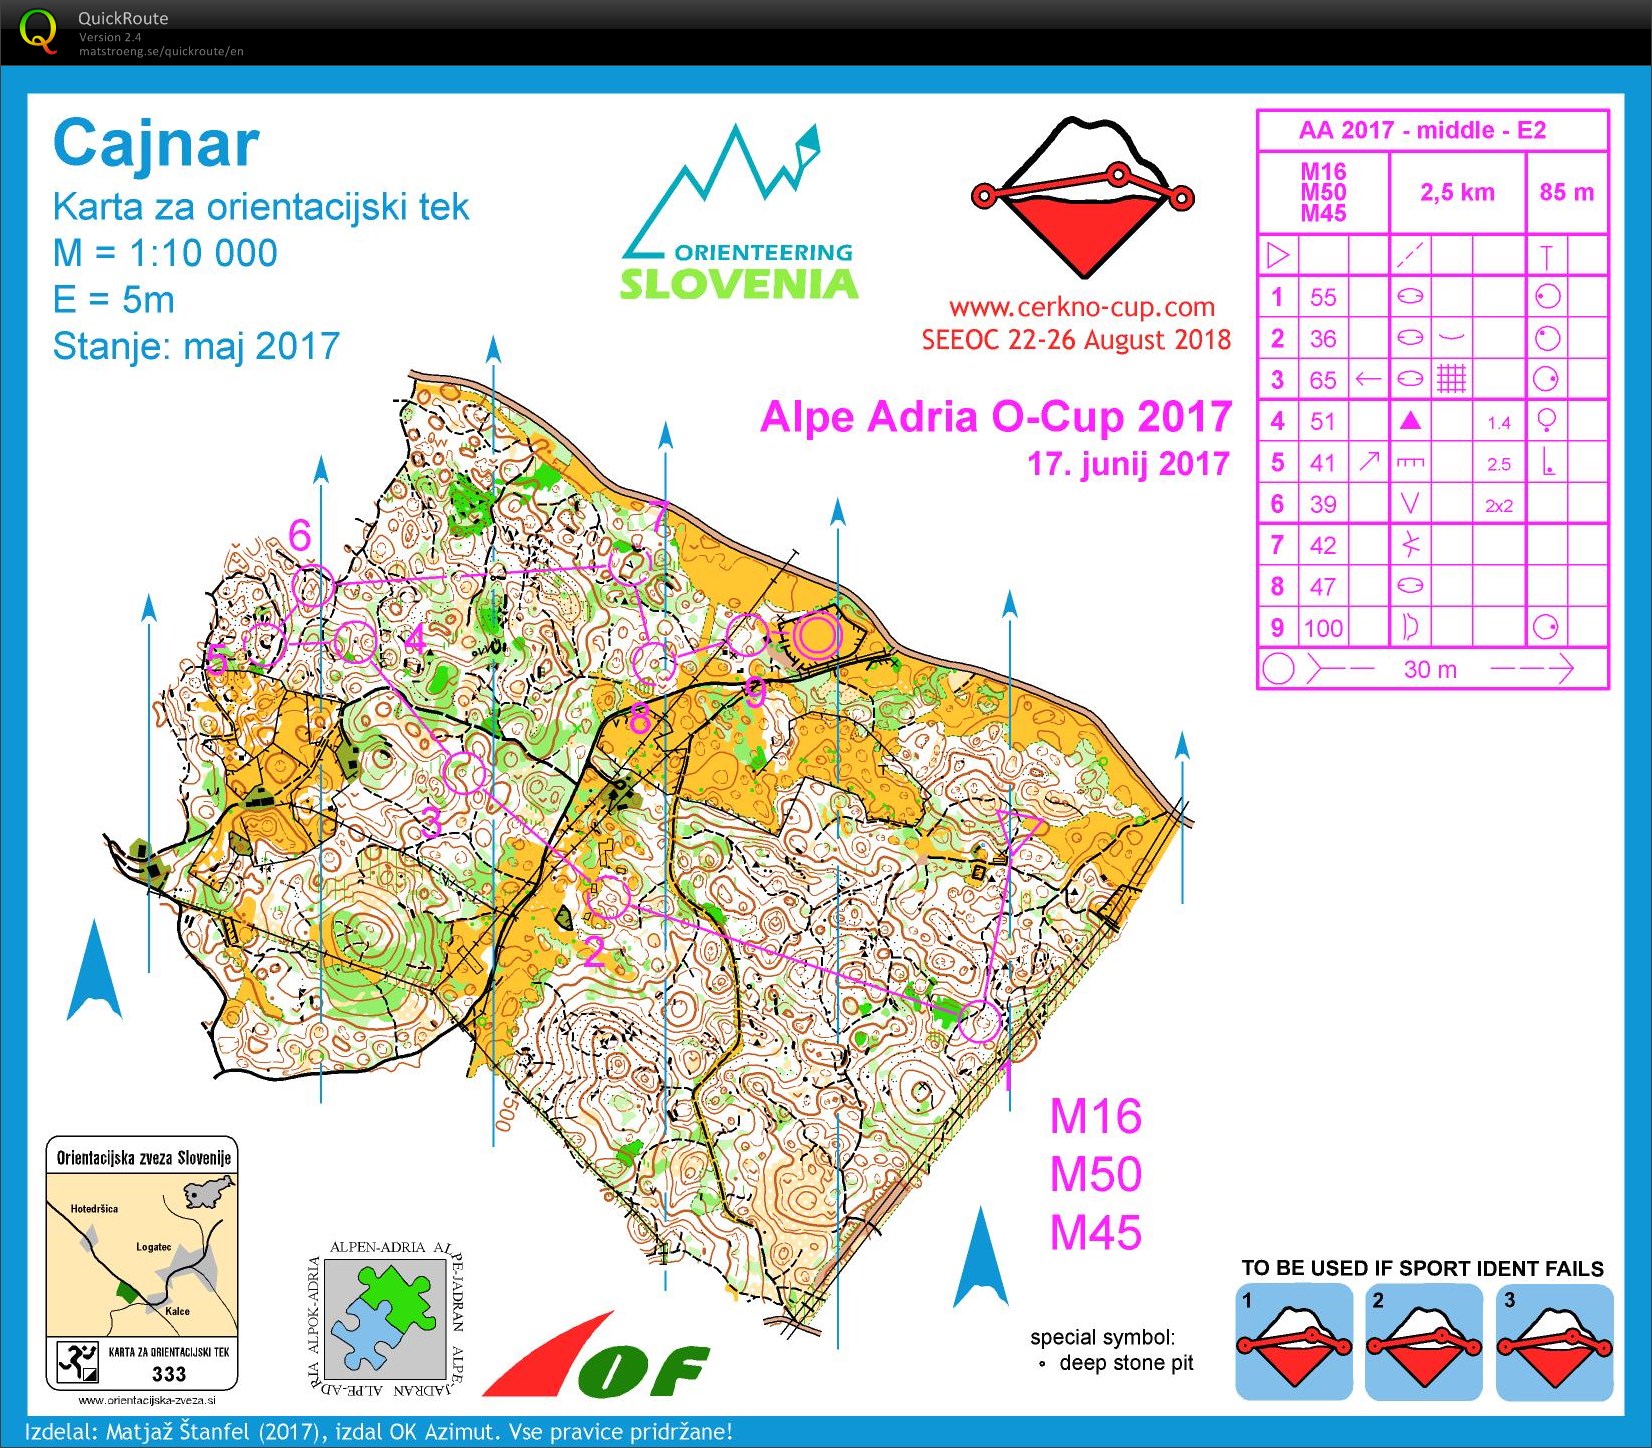 Alpe Adria Orienteering Cup - Middle (17/06/2017)